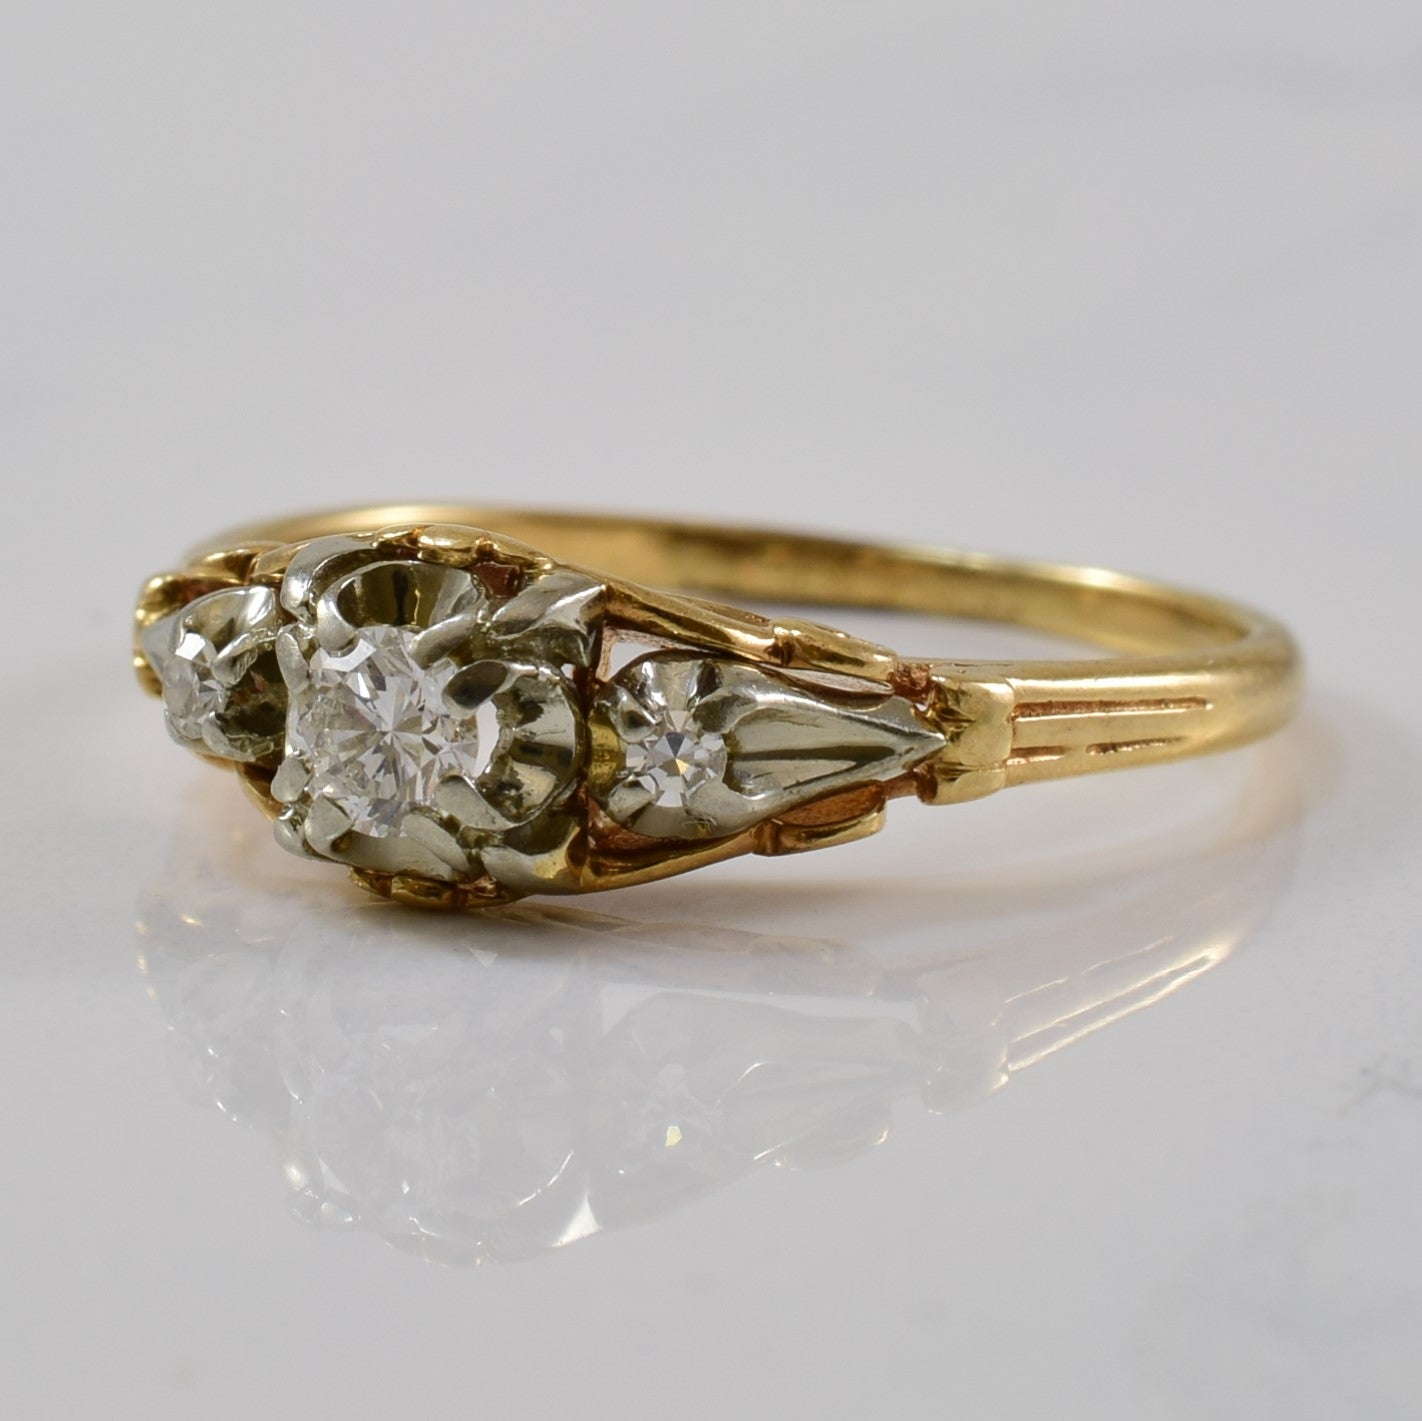 diamond vintage rings for sale in Canada, three stone diamond head gold band rings for sale